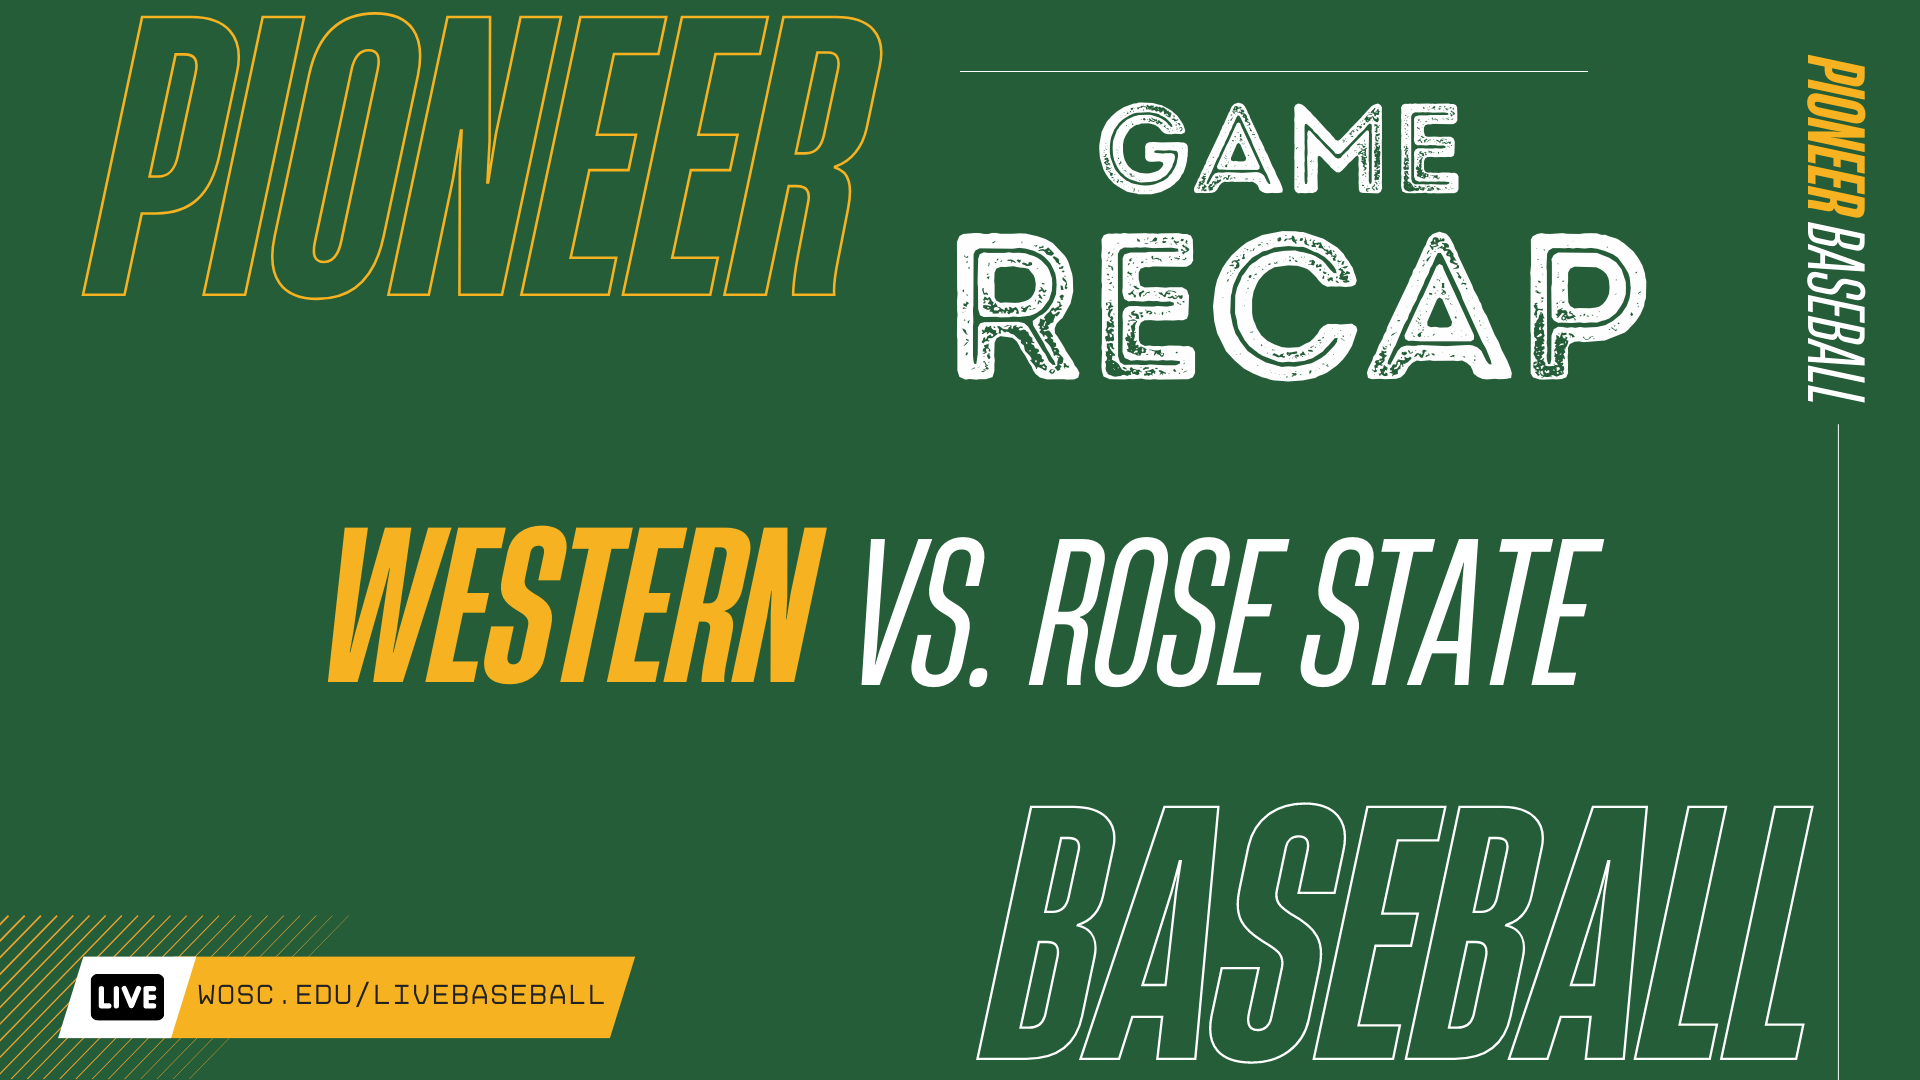 Wosc Pioneers Defeats Rose State Raiders Despite Allowing 4-Run Inning